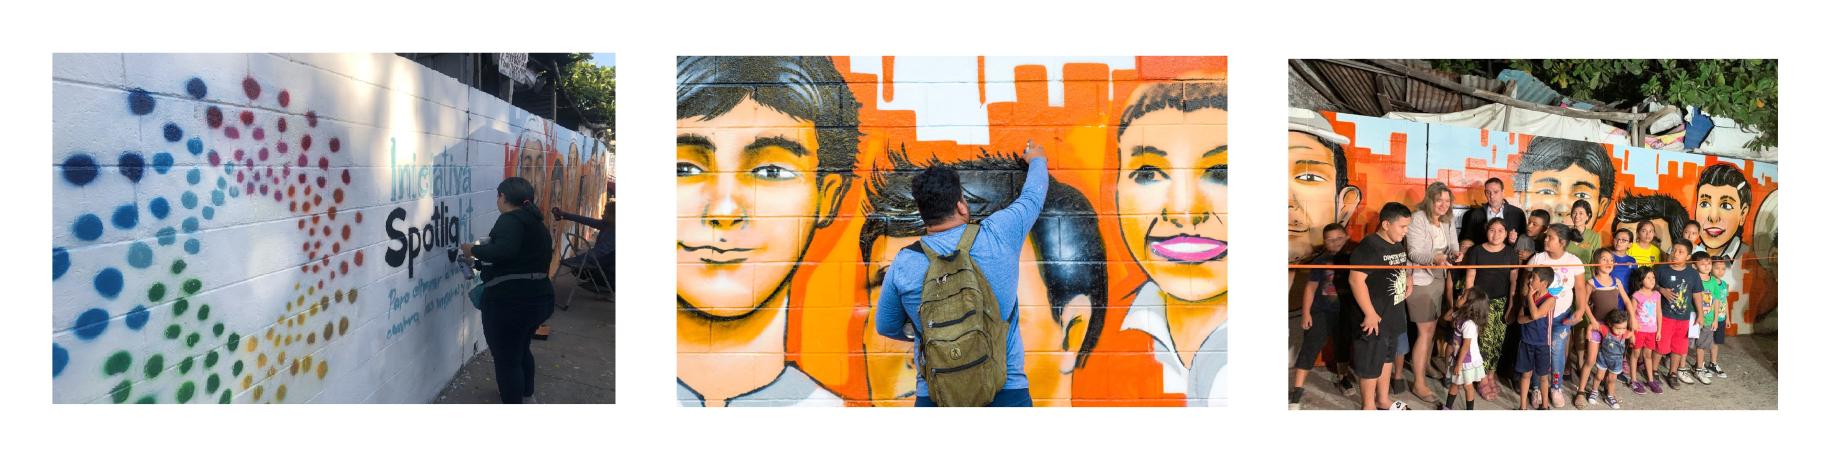 Three images: The first shows a young woman painting the Spotlight Initiative logo against a white coloured brick wall, the second a young man painting a mural of youth, and the last shows children, youth and community members cutting the ceremonial ribbon in front of the painted mural. 